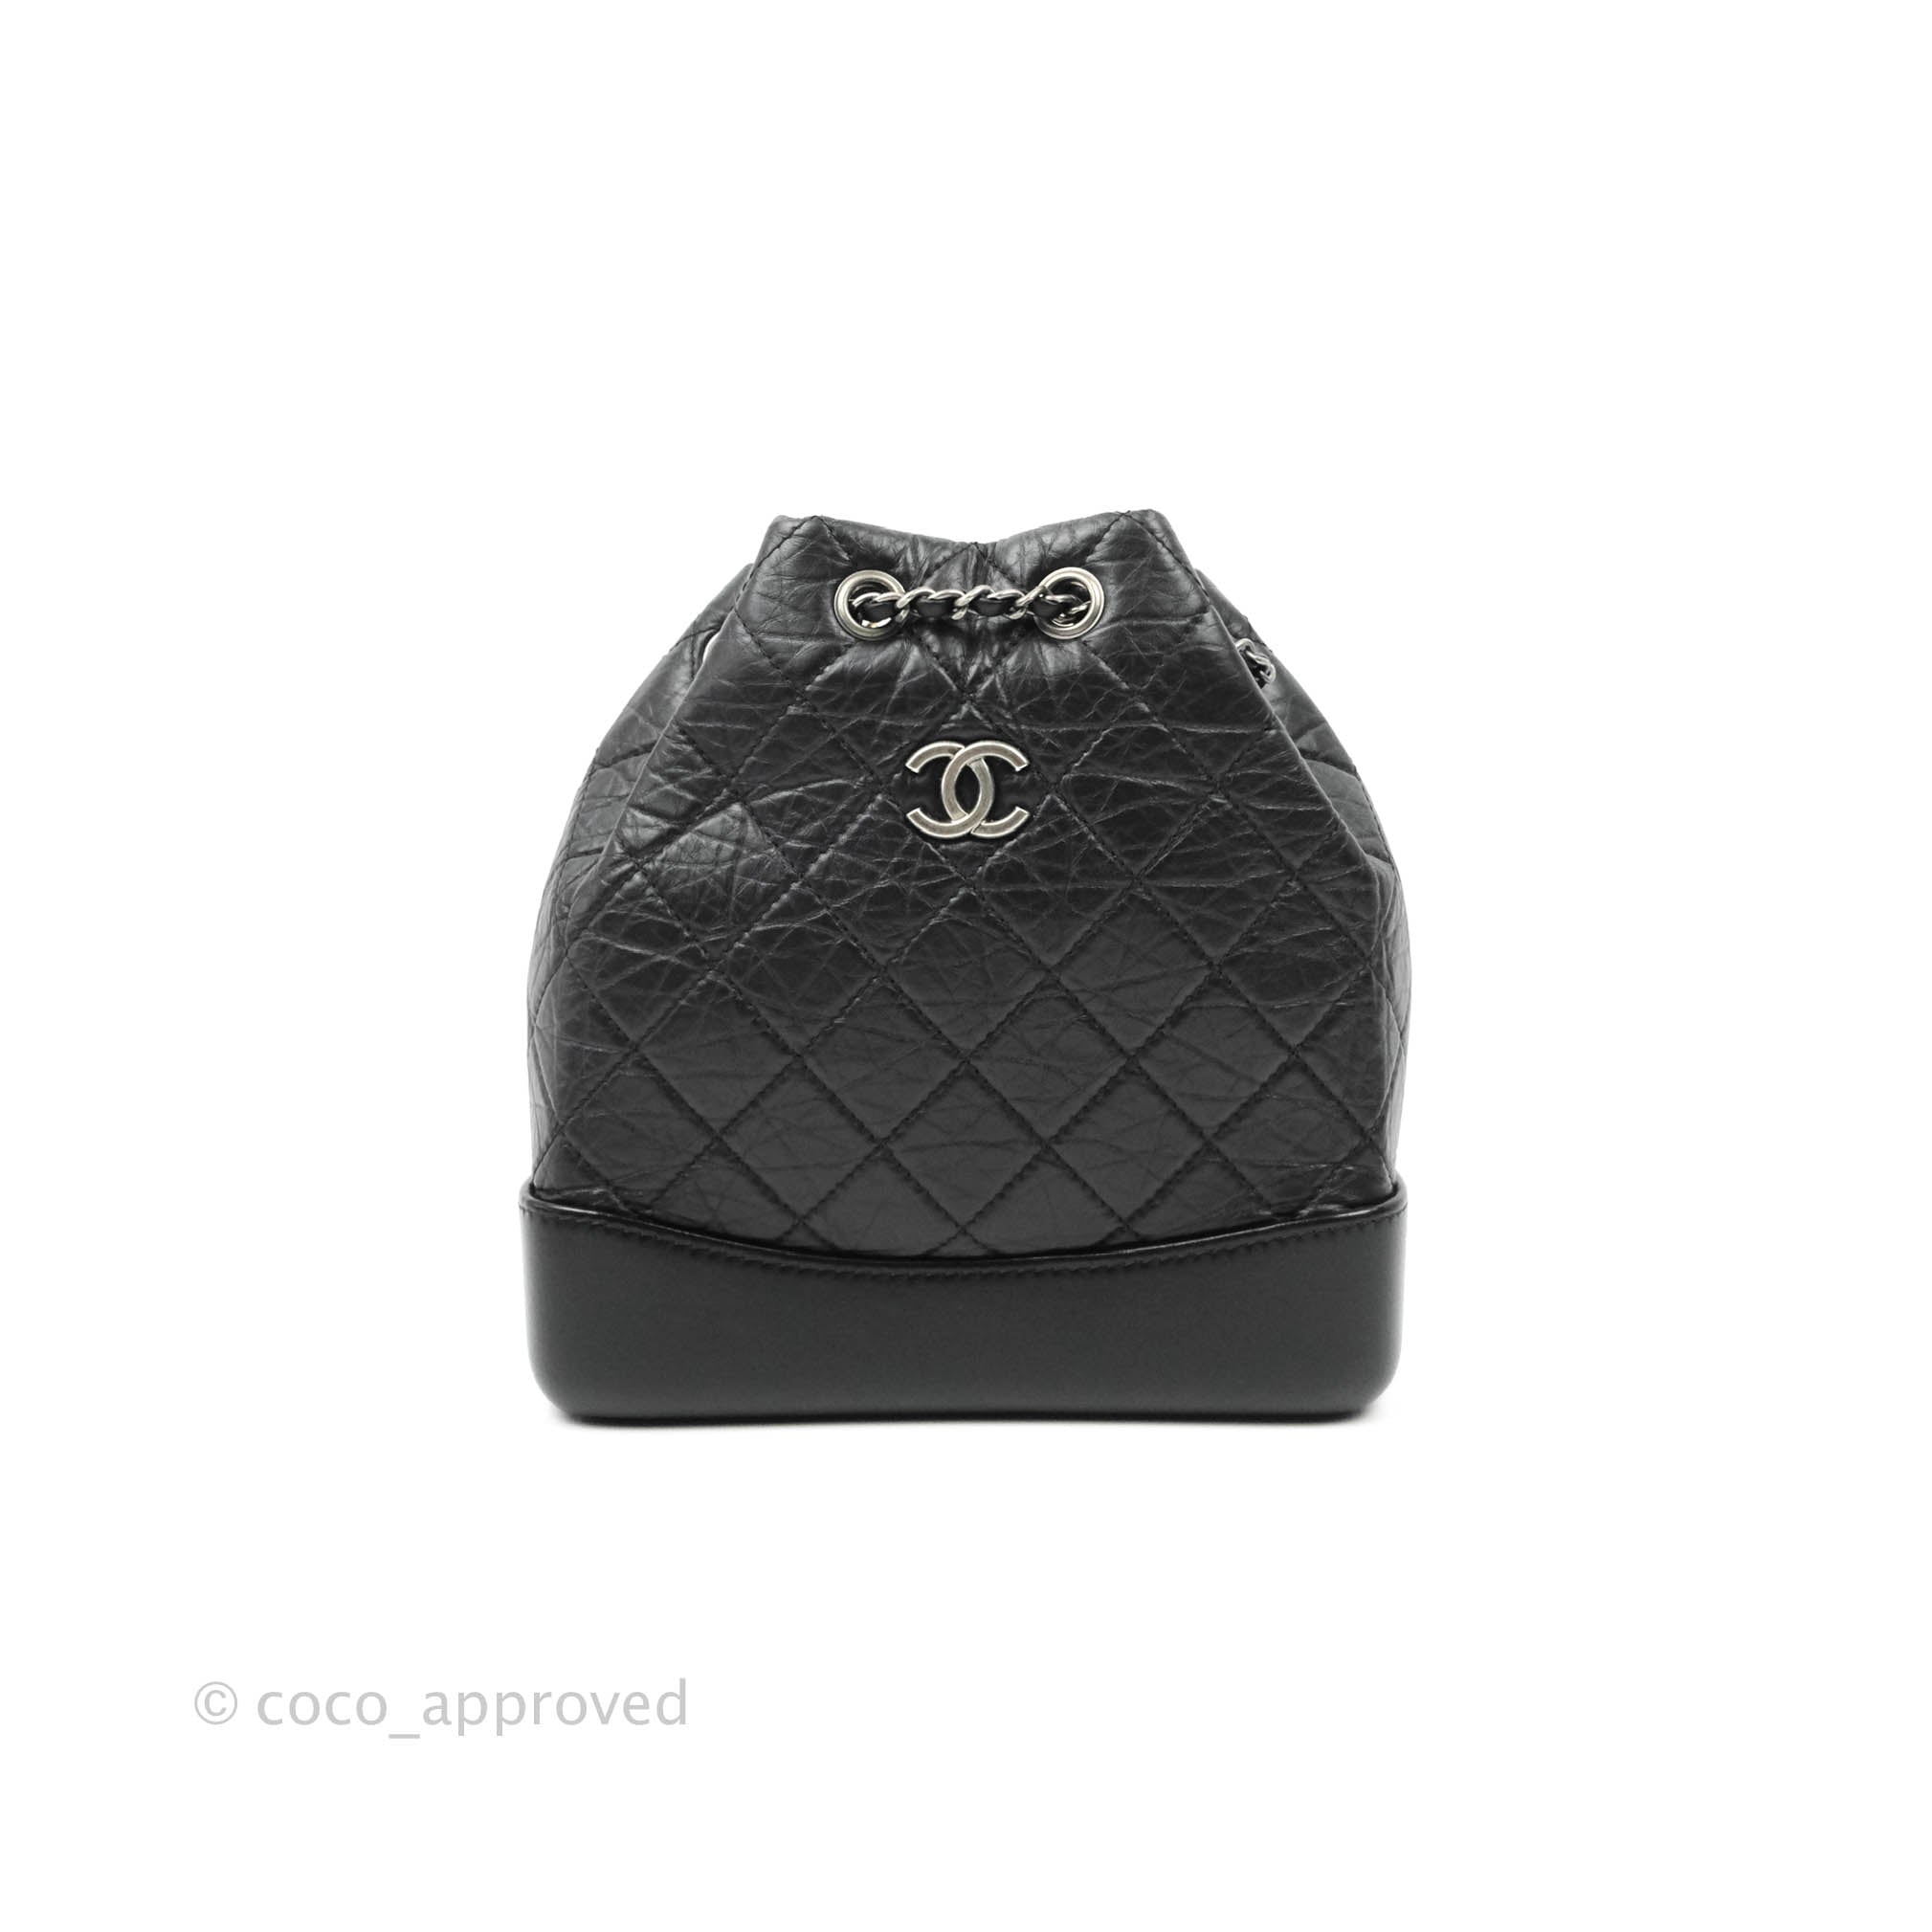 Chanel Small Gabrielle Backpack Black Aged Calfskin